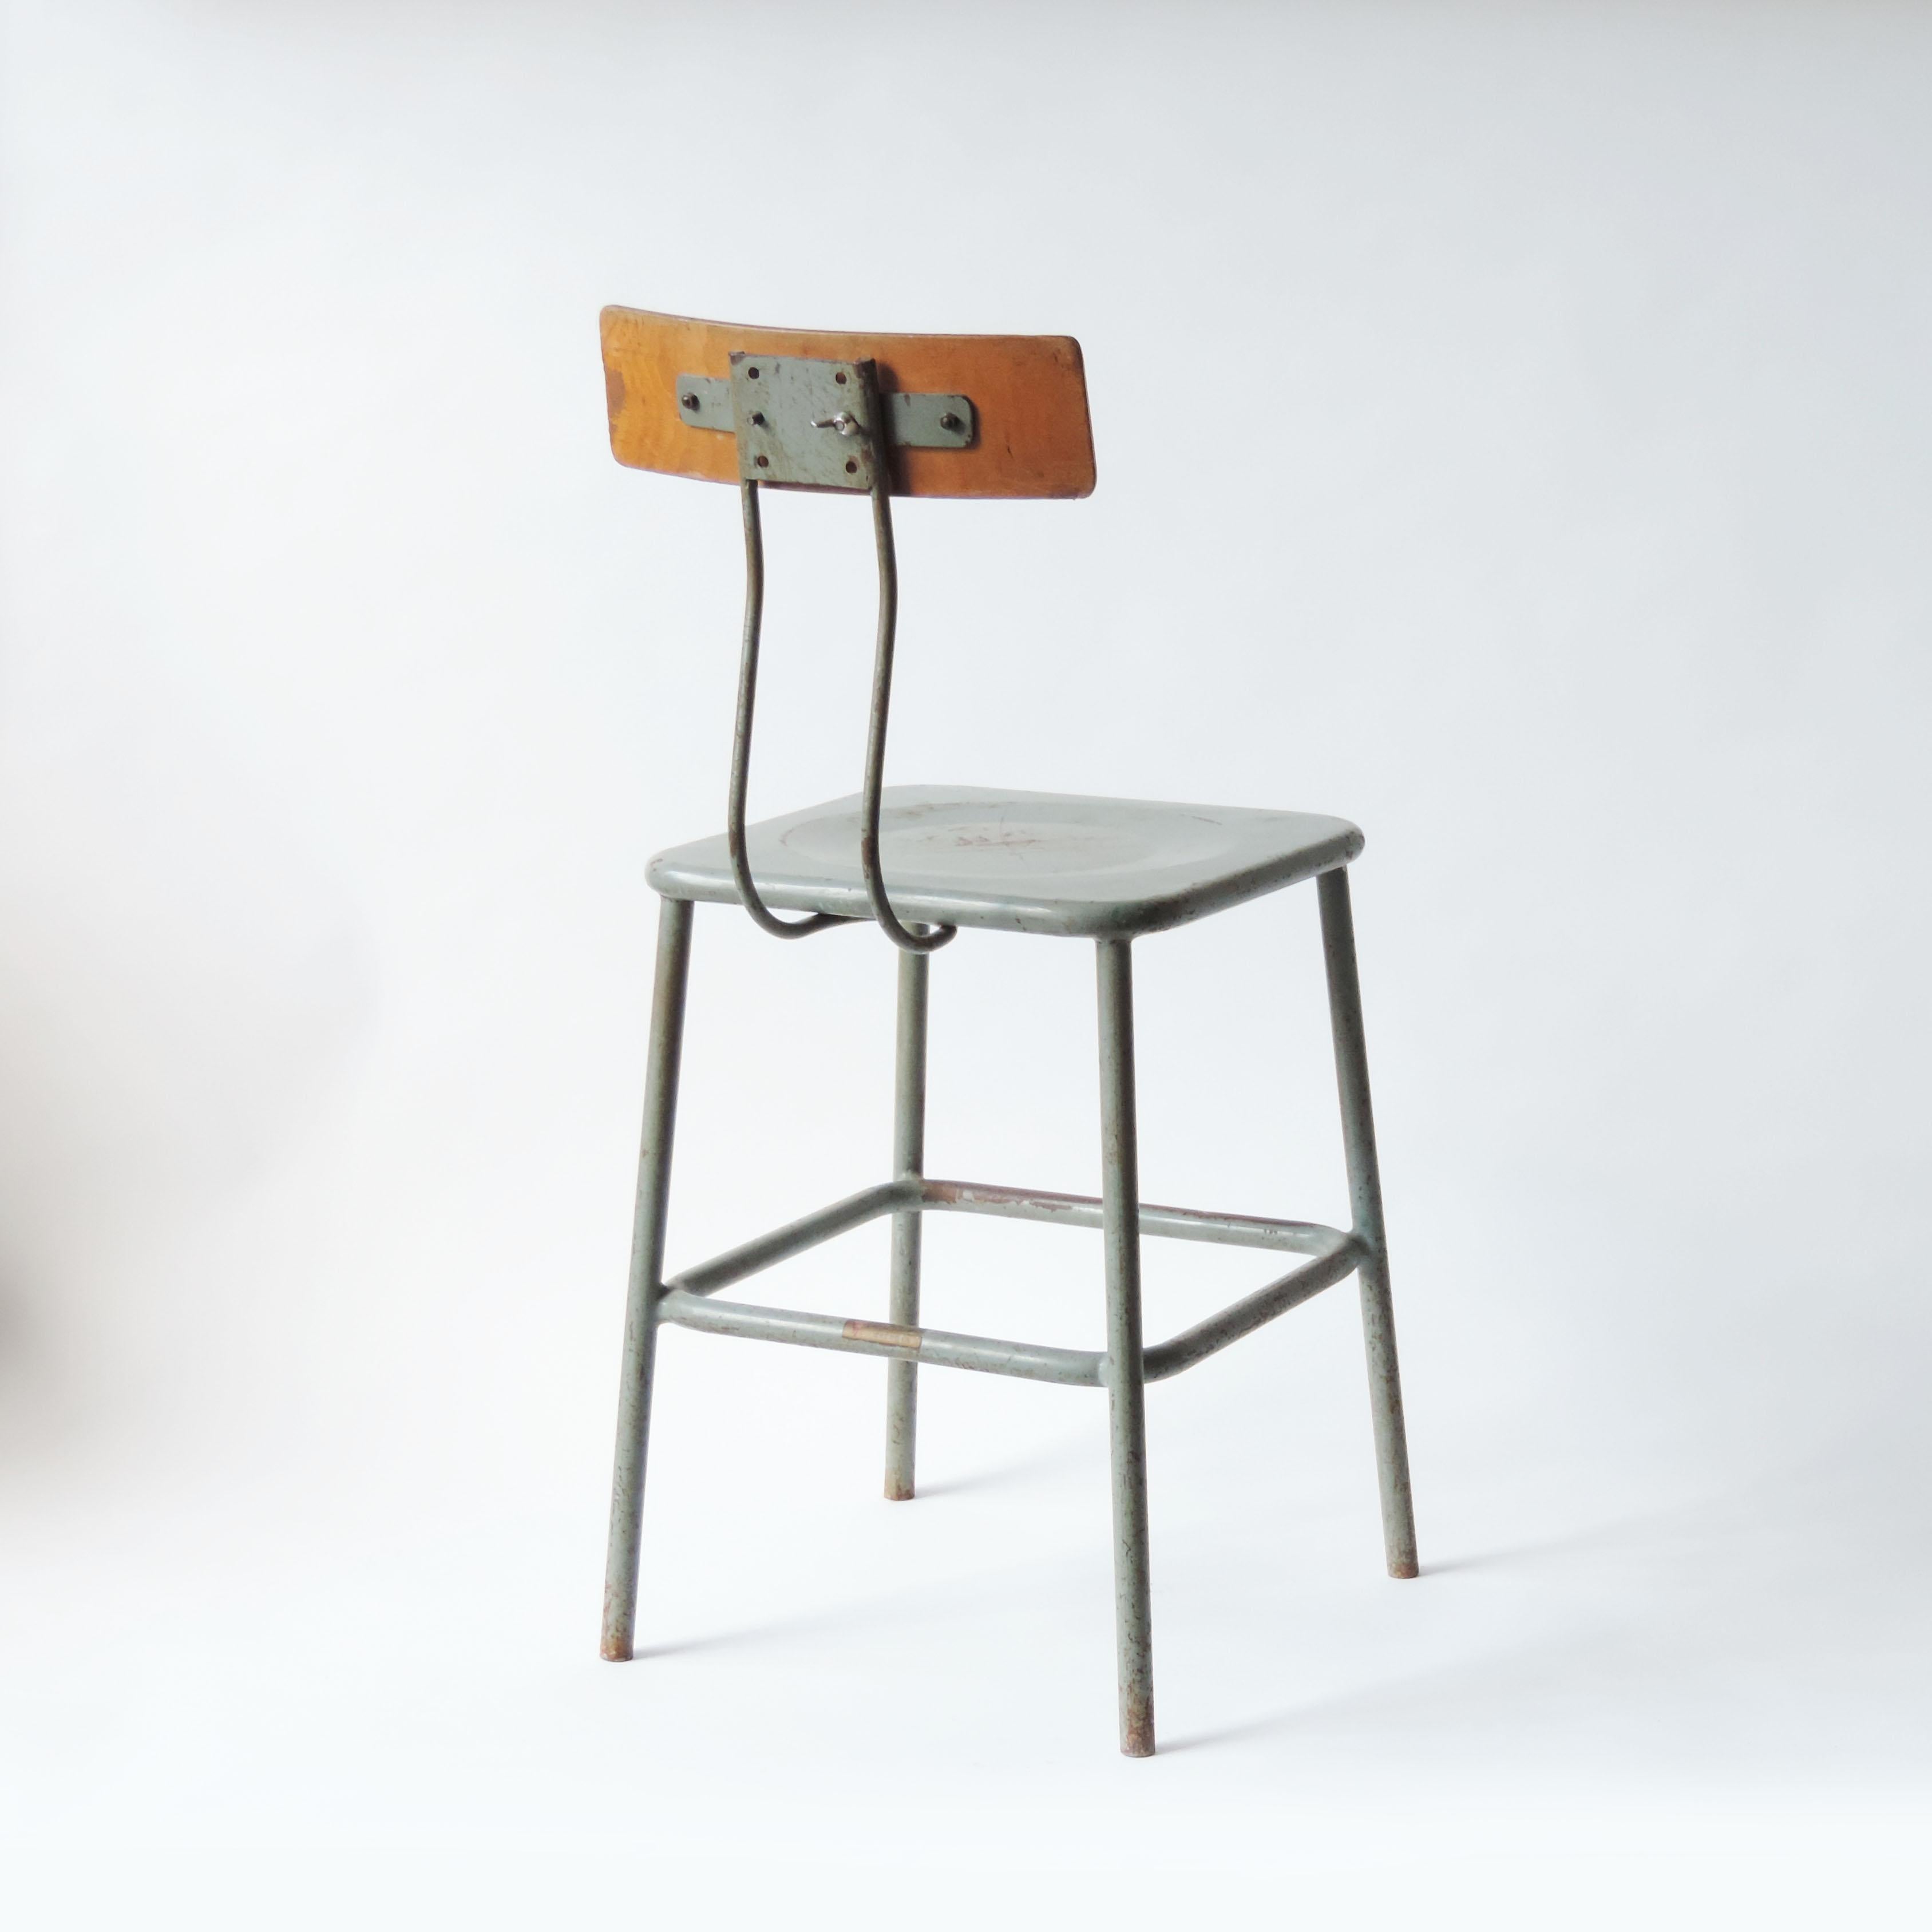 Cold-Painted Set of Three Italian Industrial Chairs, Italy, 1950s For Sale